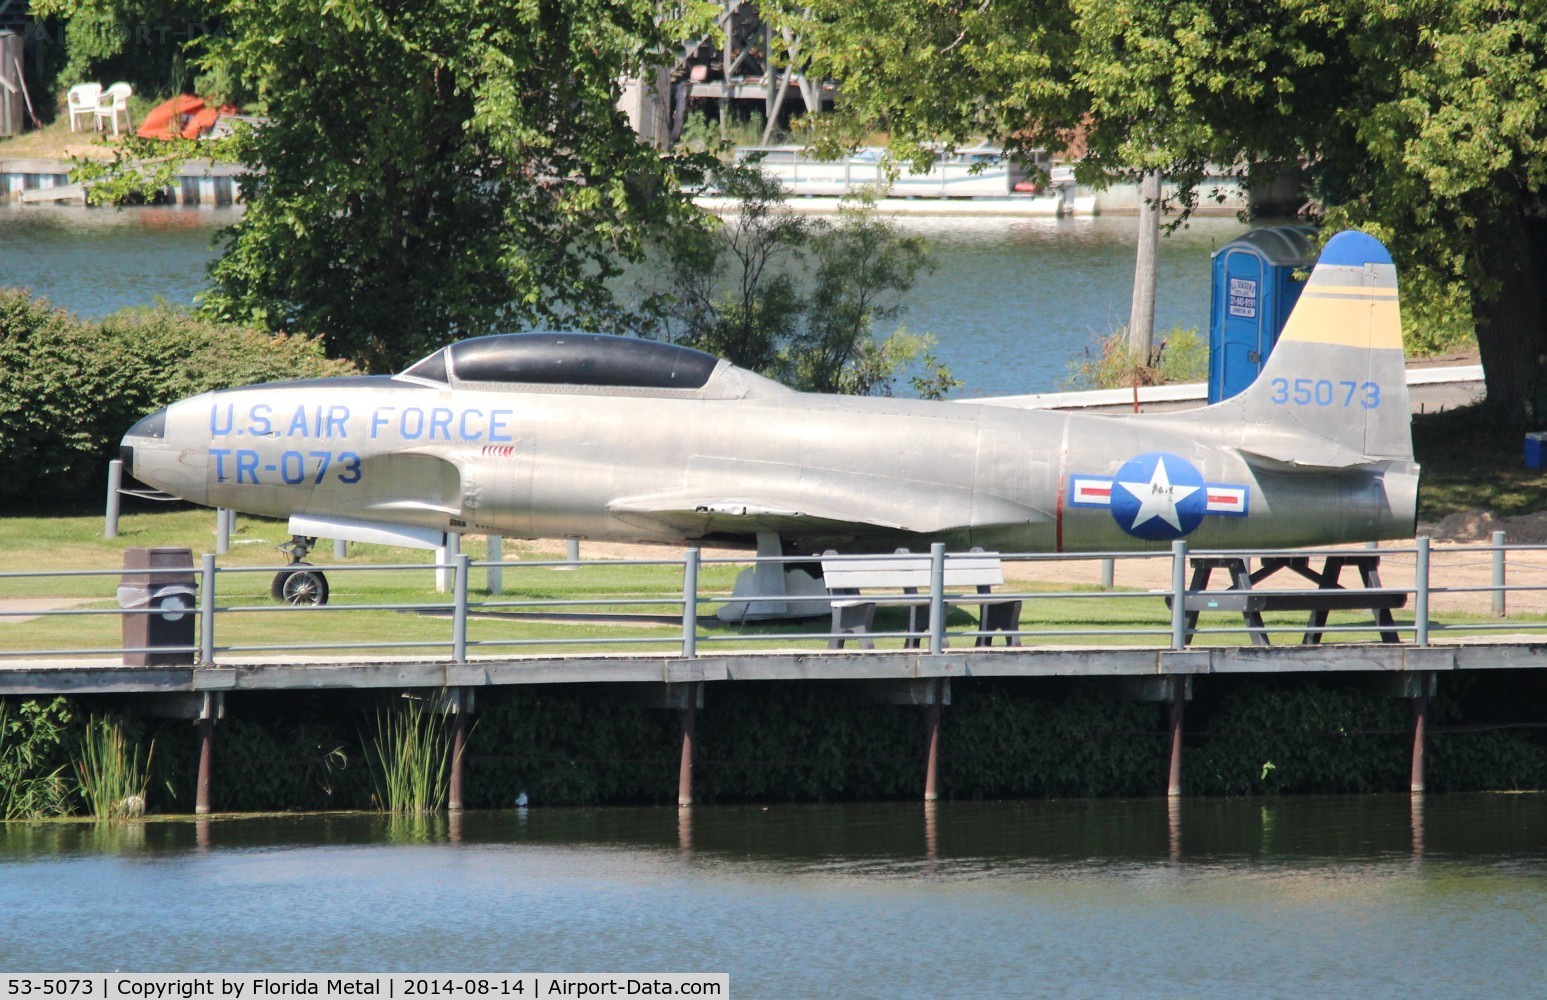 53-5073, 1953 Lockheed T-33A Shooting Star C/N 580-8423, T-33A Shooting Star in a park in Hart MI - the day I went through the road was closed at the park so I had to shoot it from across the lake with my 500mm